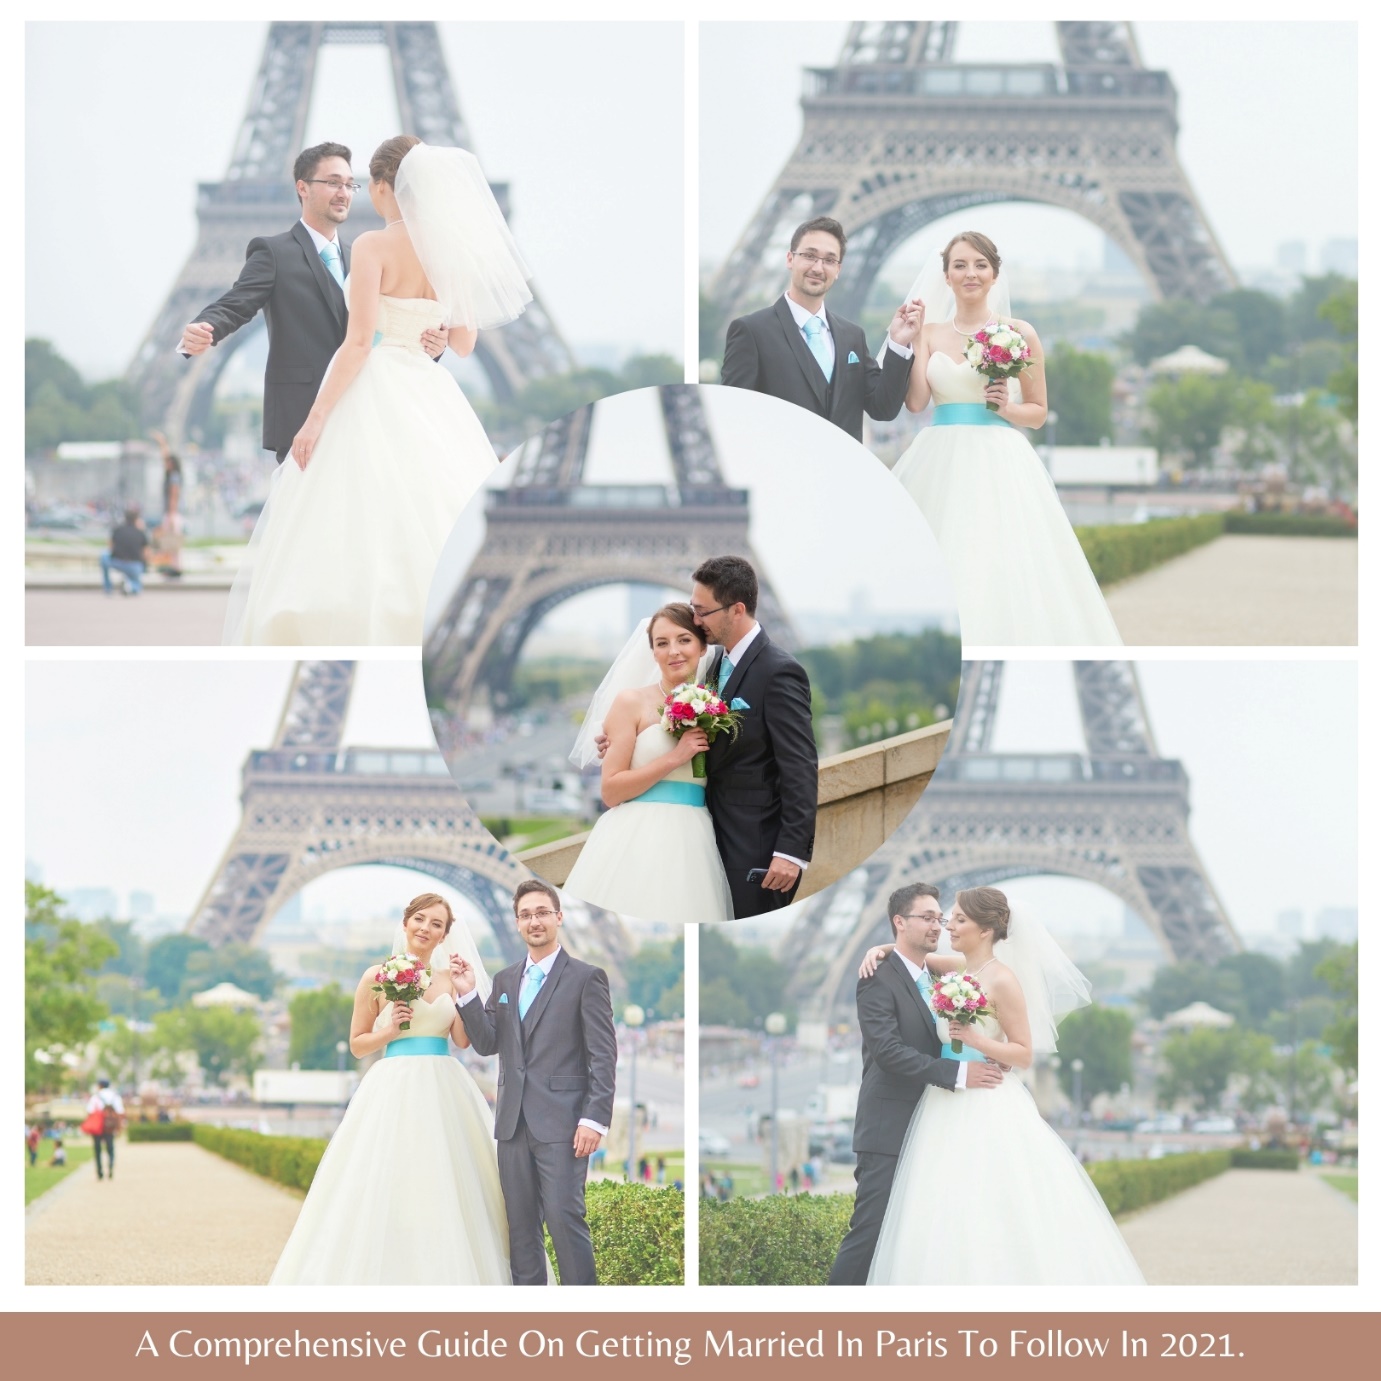 A Comprehensive Guide On Getting Married In Paris To Follow In 2021